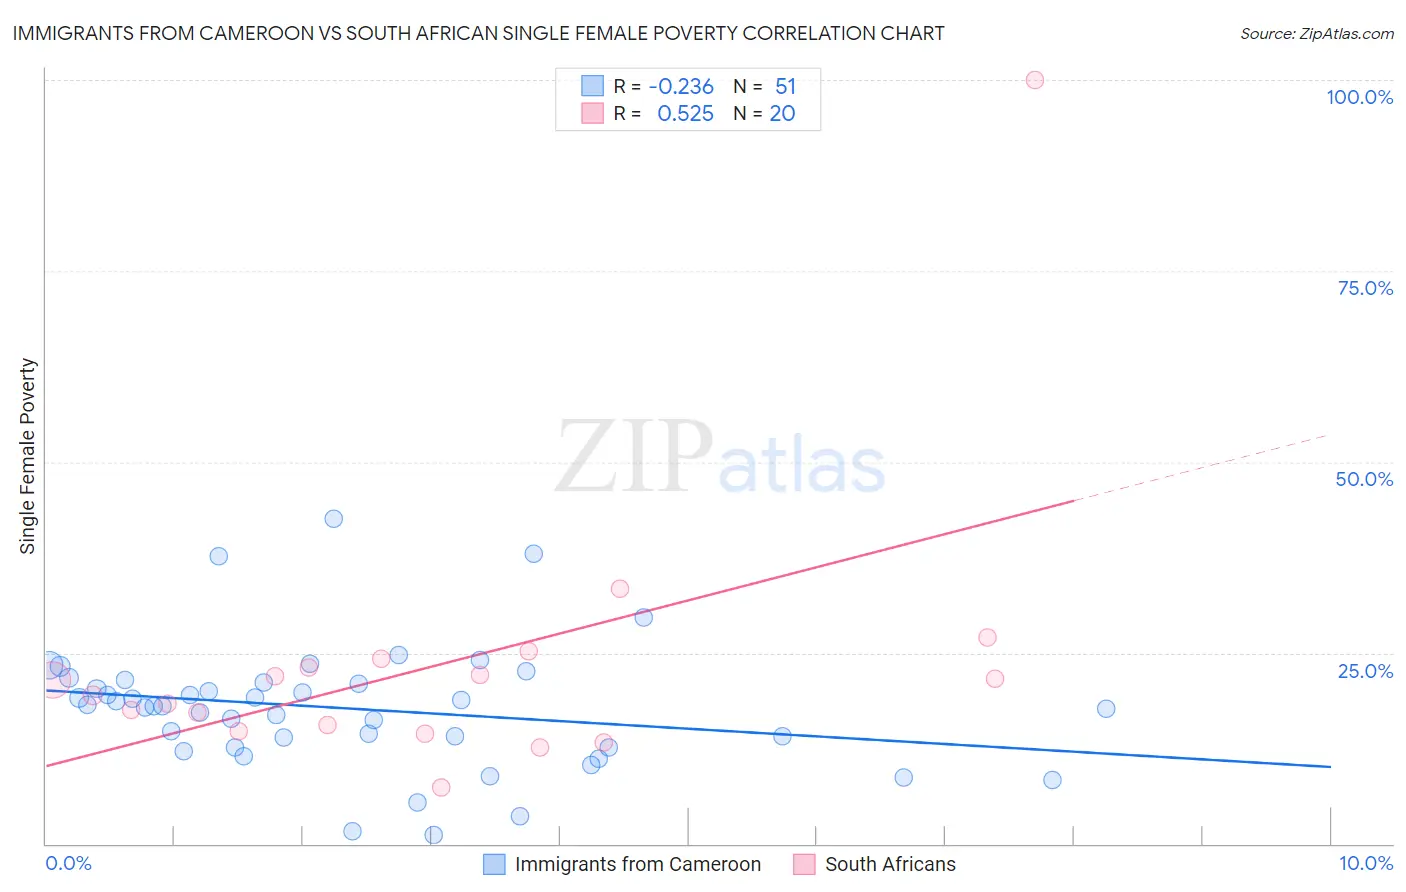 Immigrants from Cameroon vs South African Single Female Poverty